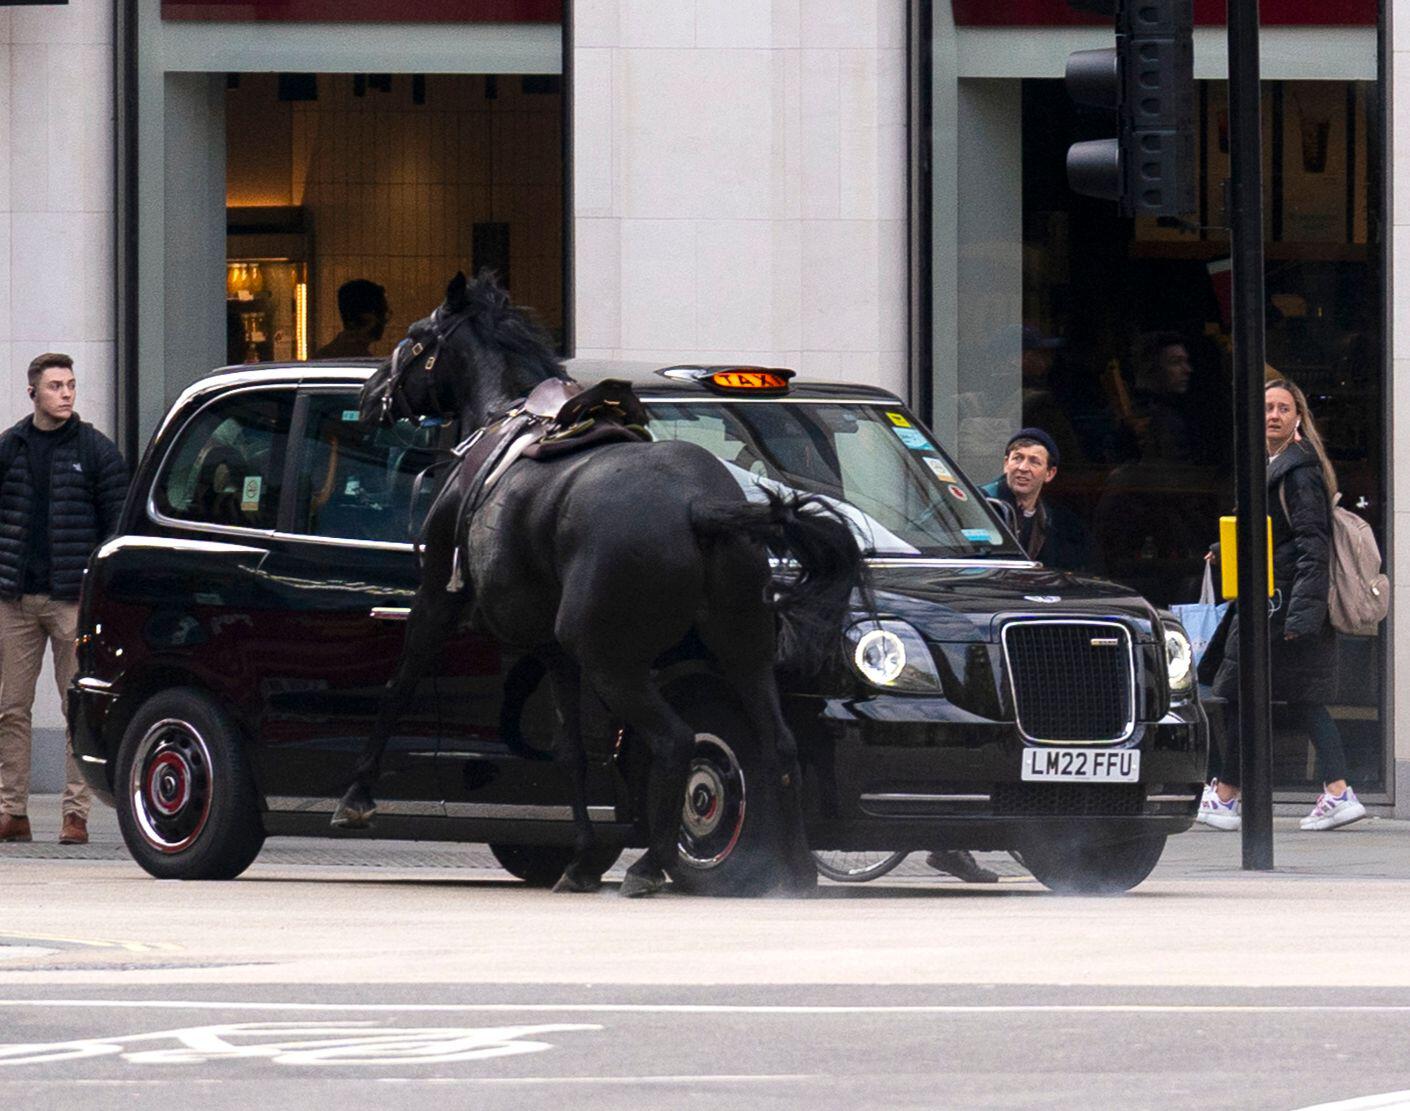 A black horse collides with a black taxi in London, 24-4-24